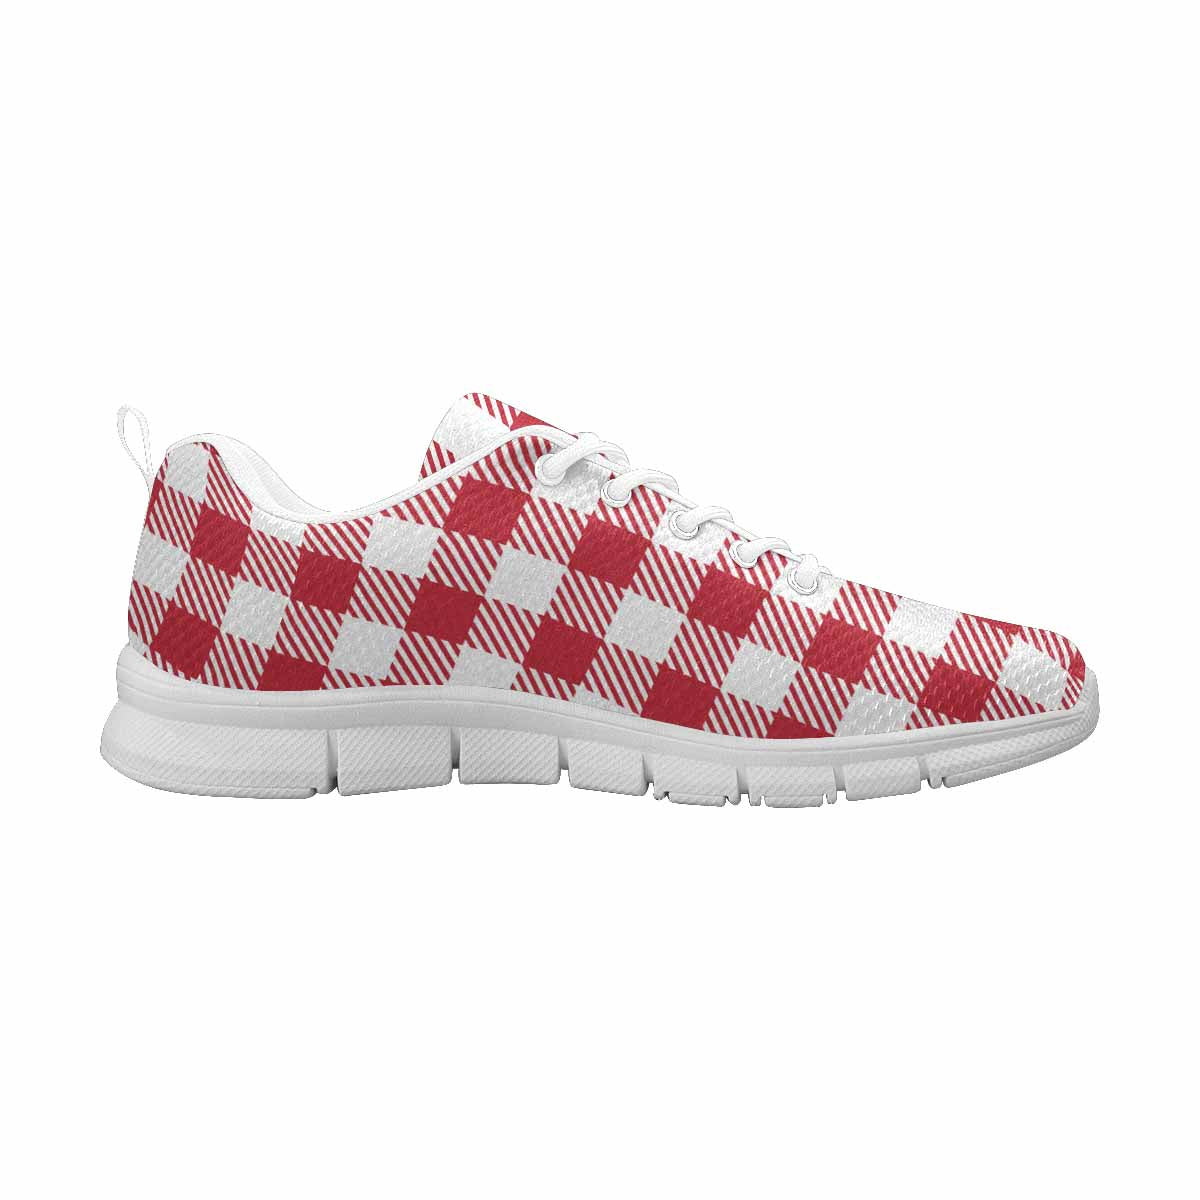 Sneakers For Men,   Buffalo Plaid Red And White - Running Shoes Dg863